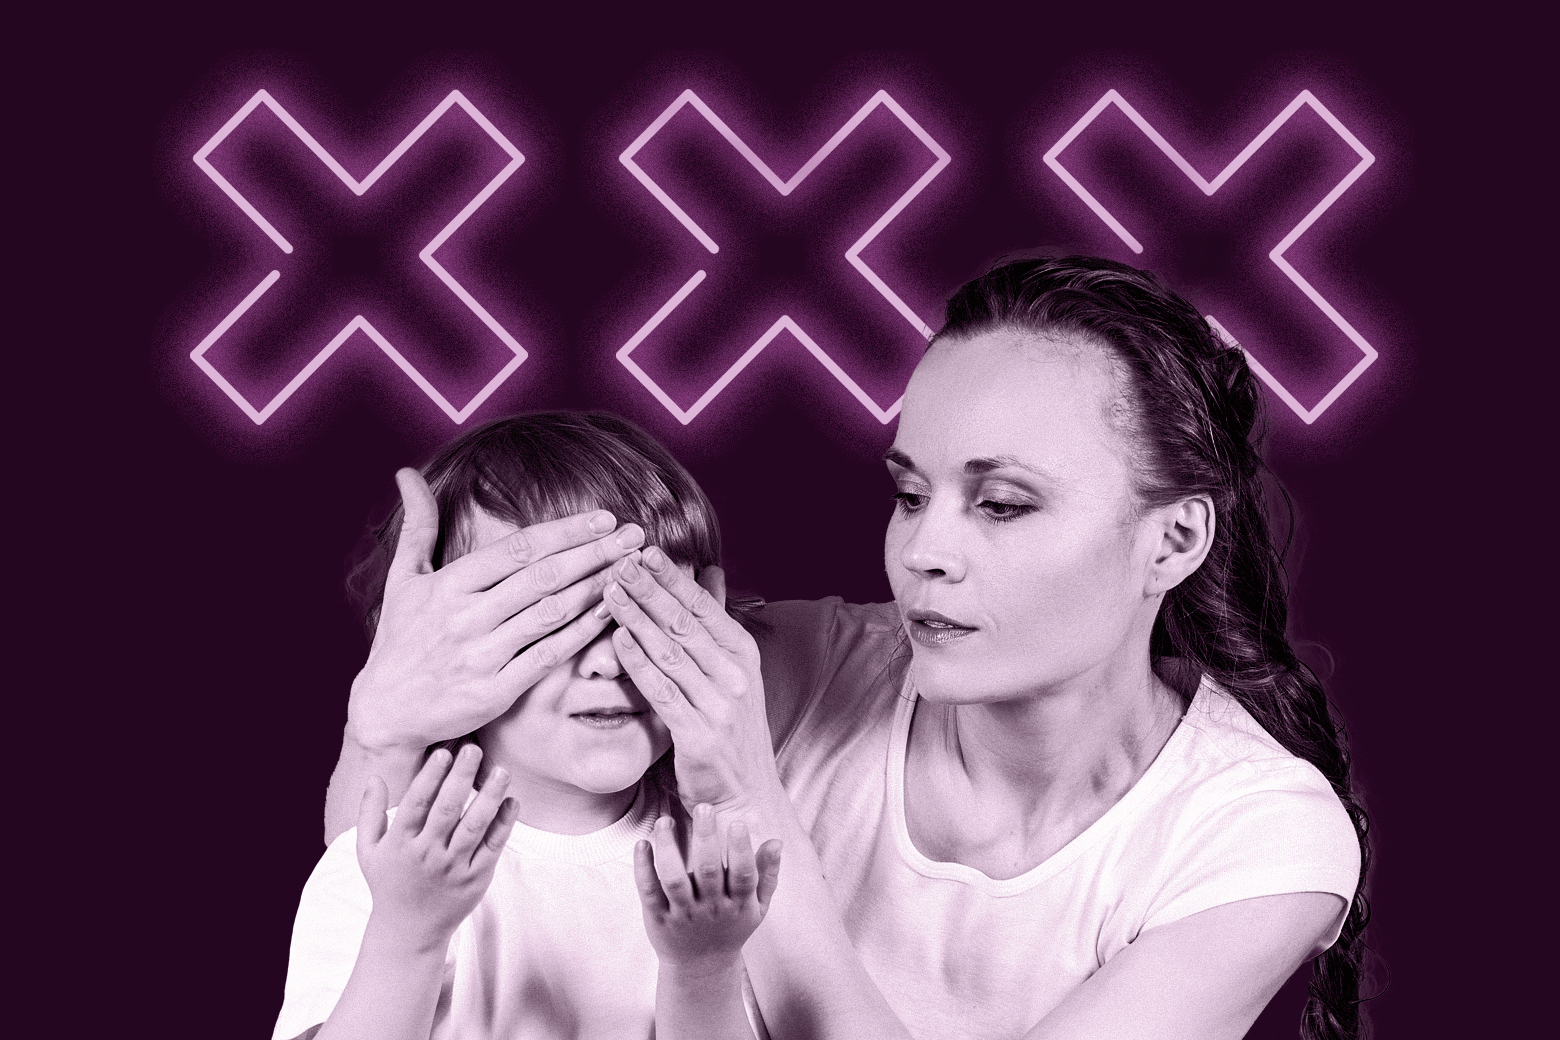 Porn addiction signs My husband has none of them, so why do I care that he watches